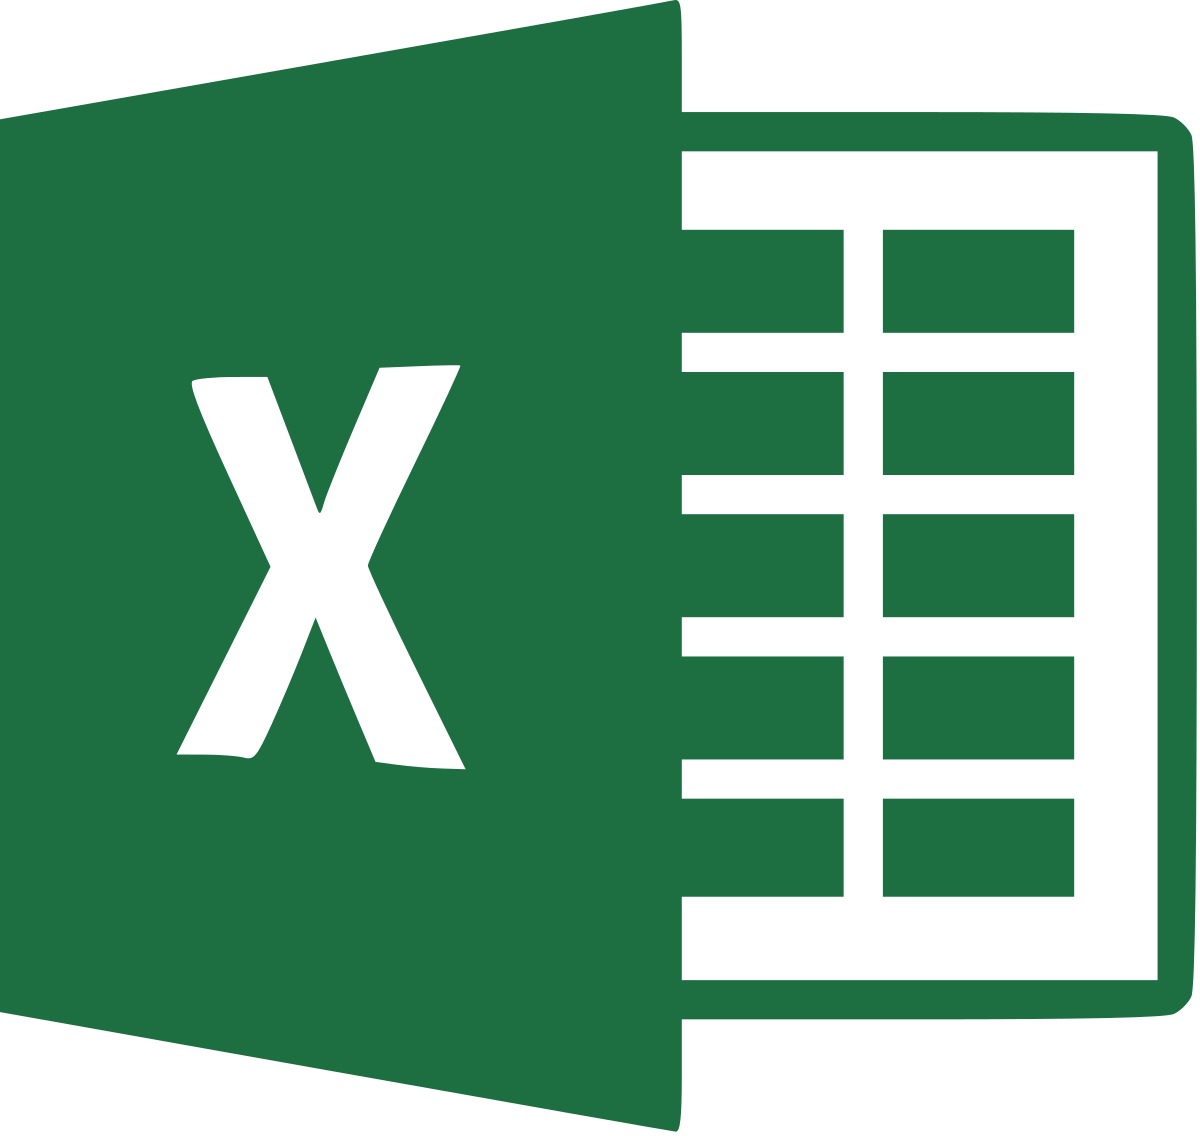 microsoft office excel 2018